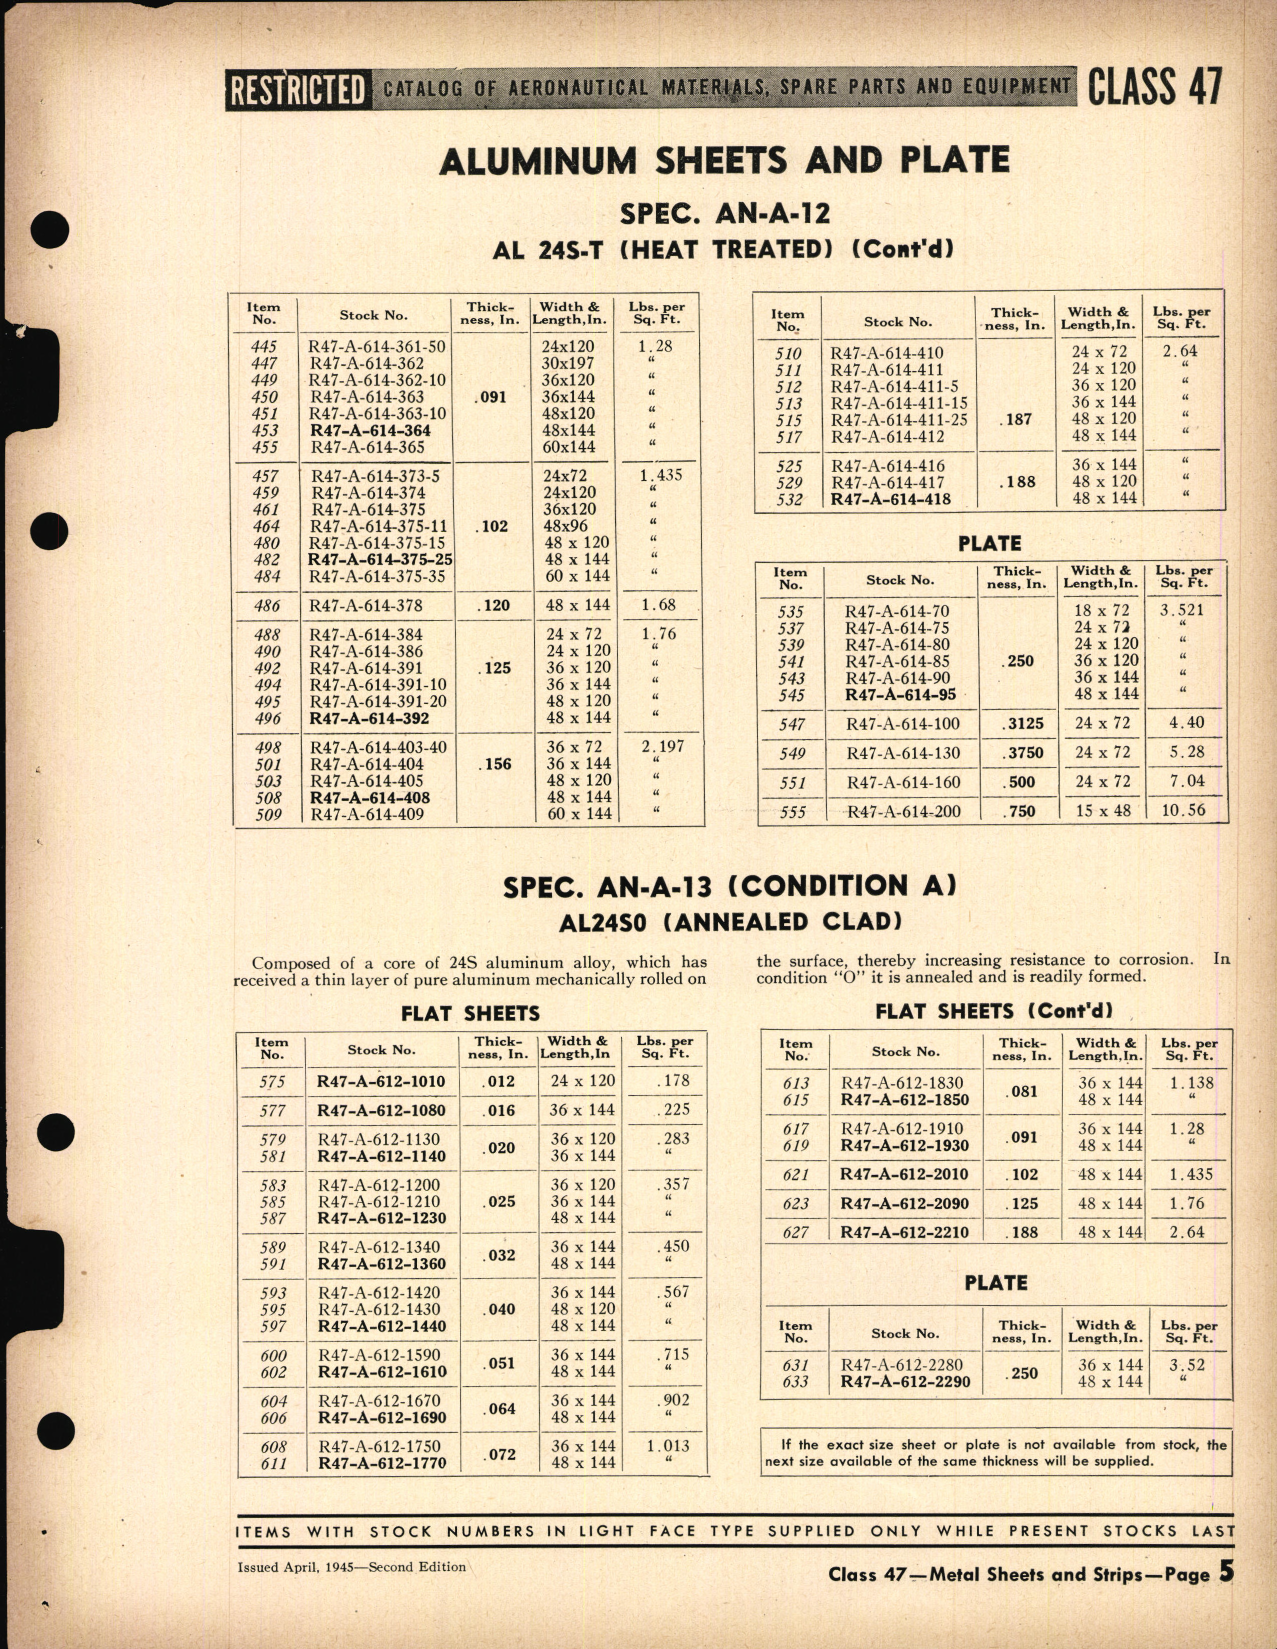 Sample page 5 from AirCorps Library document: Metal Sheets and Strips